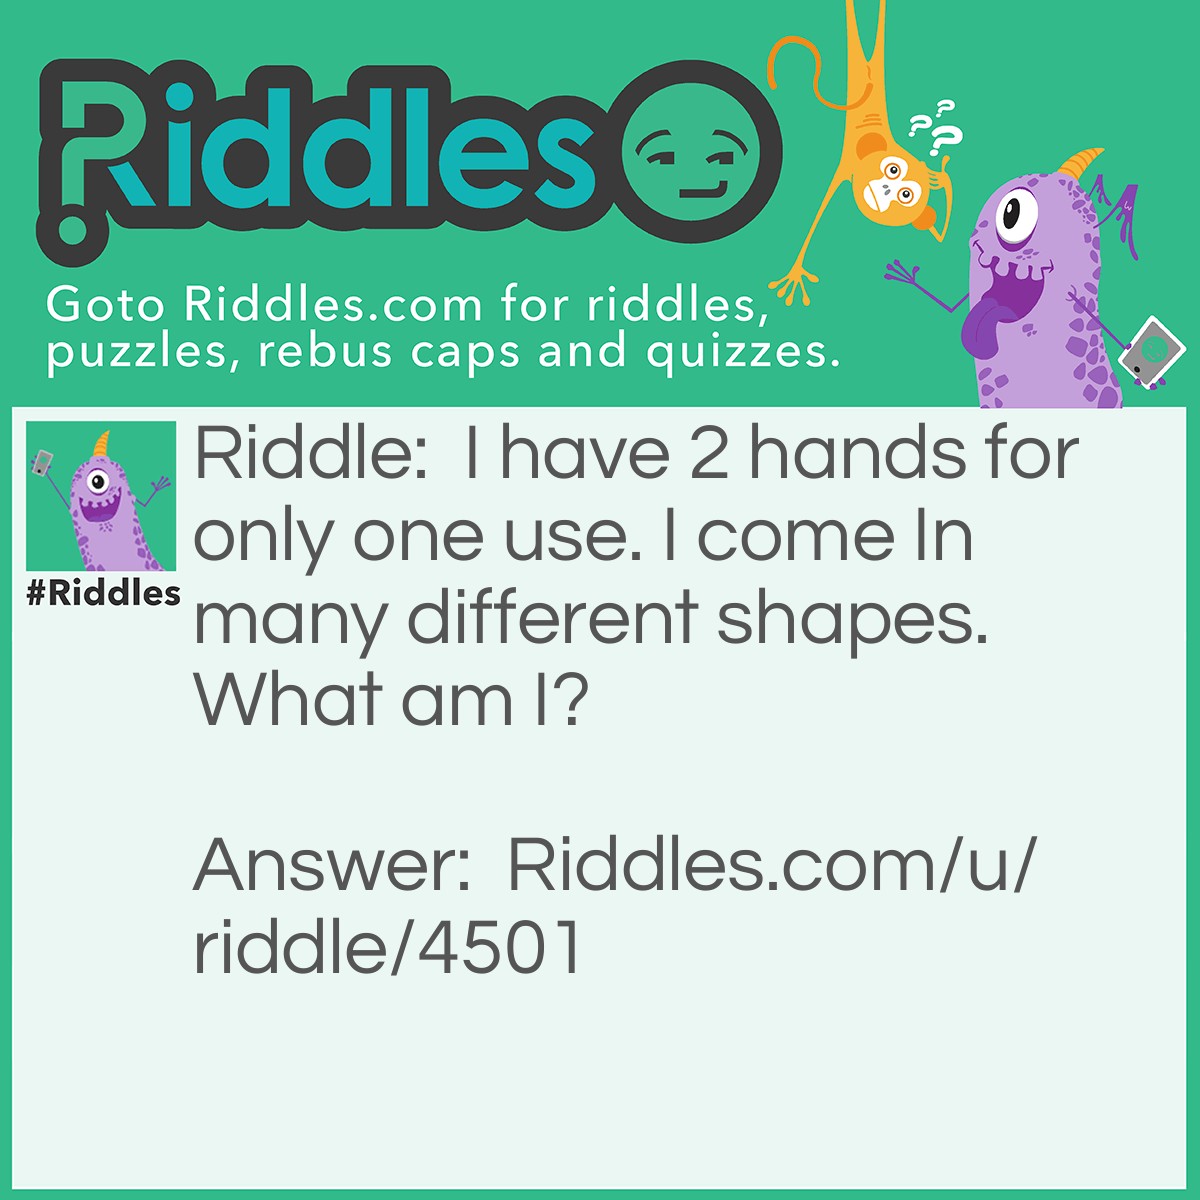 Riddle: I have 2 hands for only one use. I come In many different shapes. What am I? Answer: A clock.